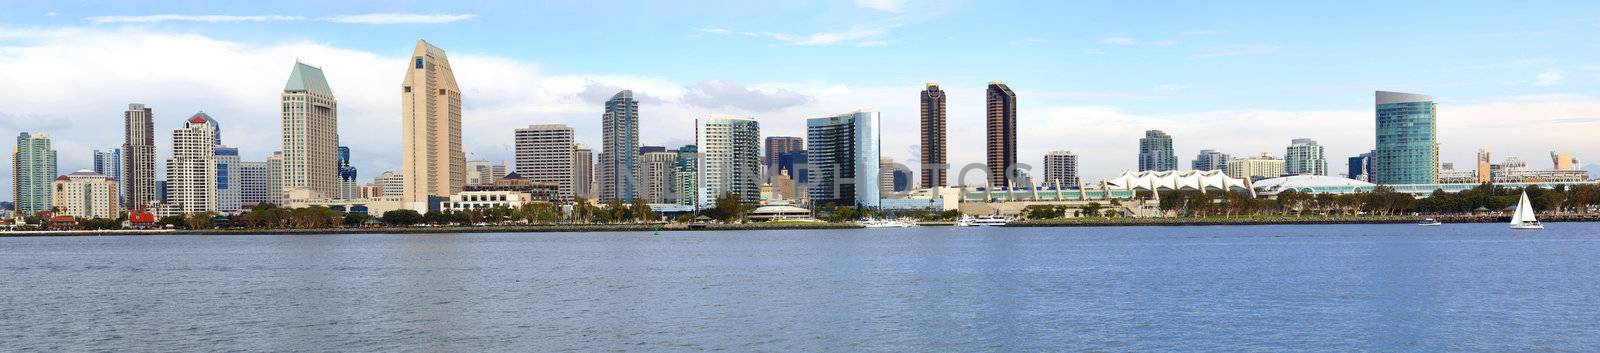 A panoramic view of the San Diego skyline.